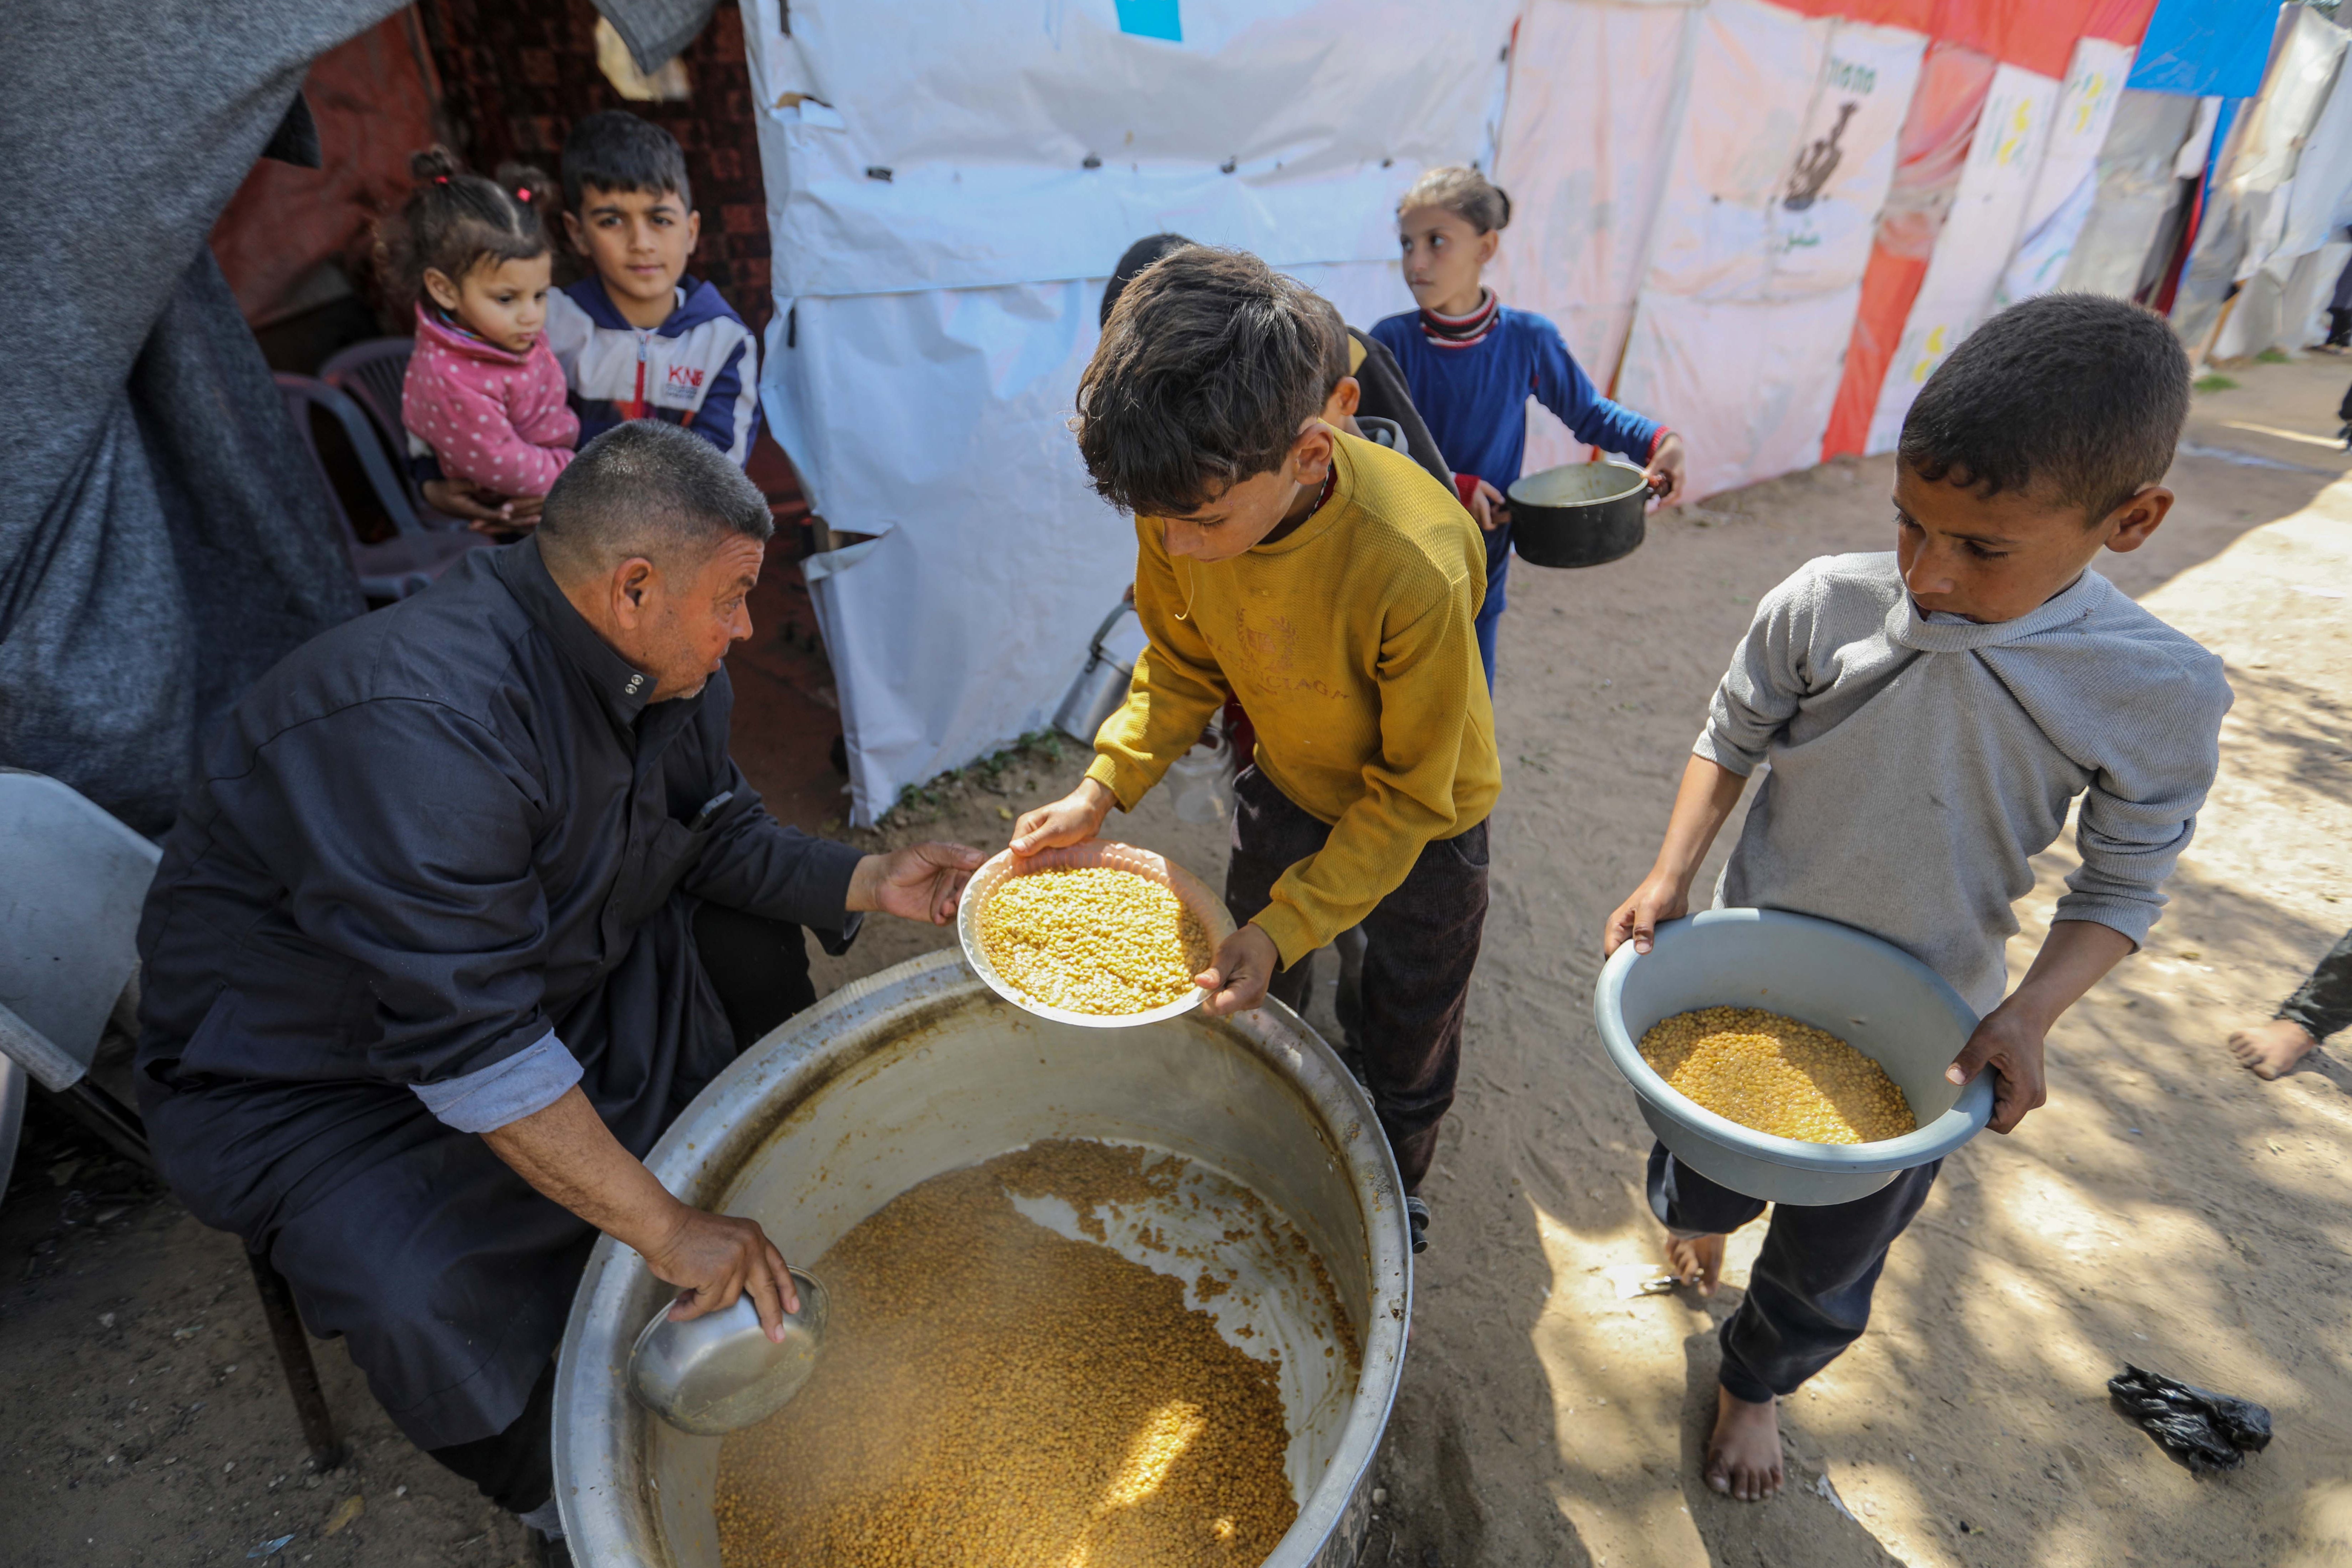 Citizens queue for food that is cooked in large pots and distributed for free in Rafah, southern Gaza